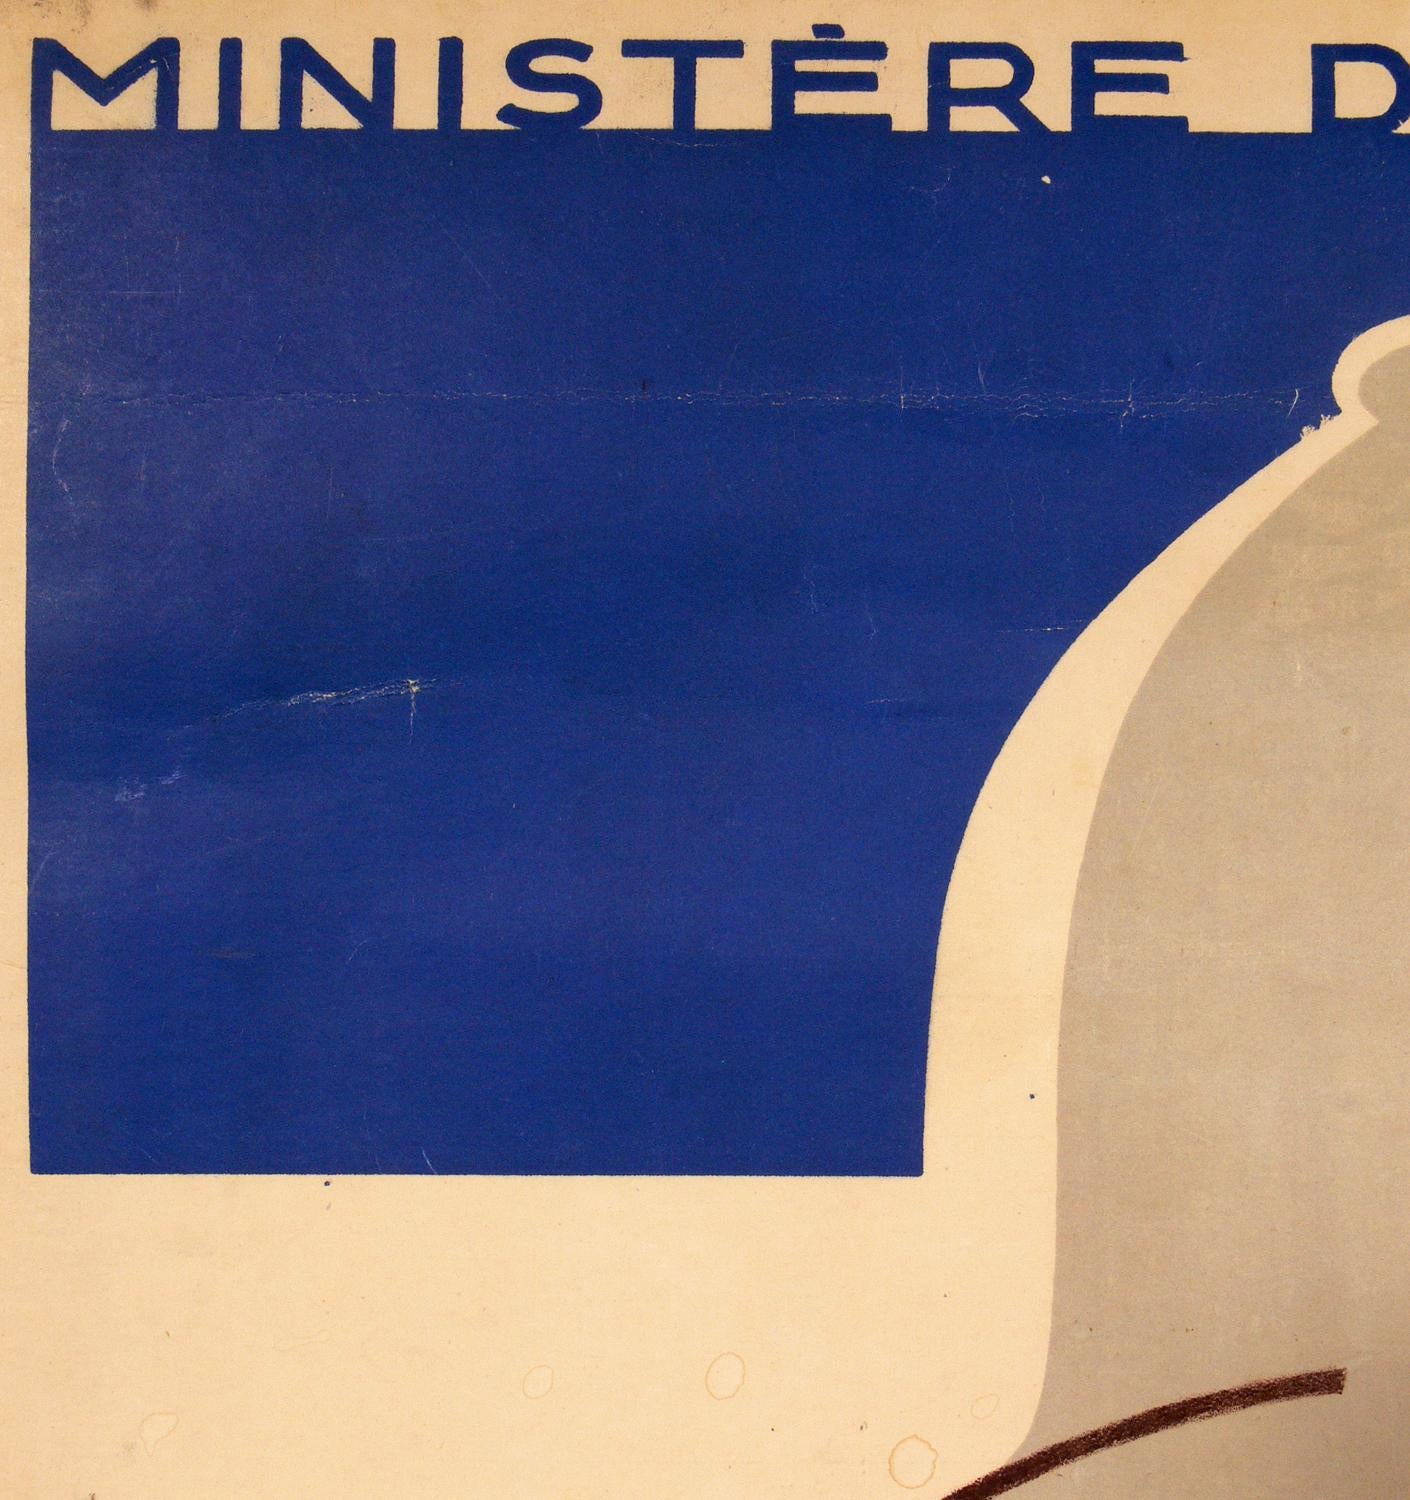 Mid-20th Century Original 1930s French Art Deco Poster by Fabrice Mory For Sale